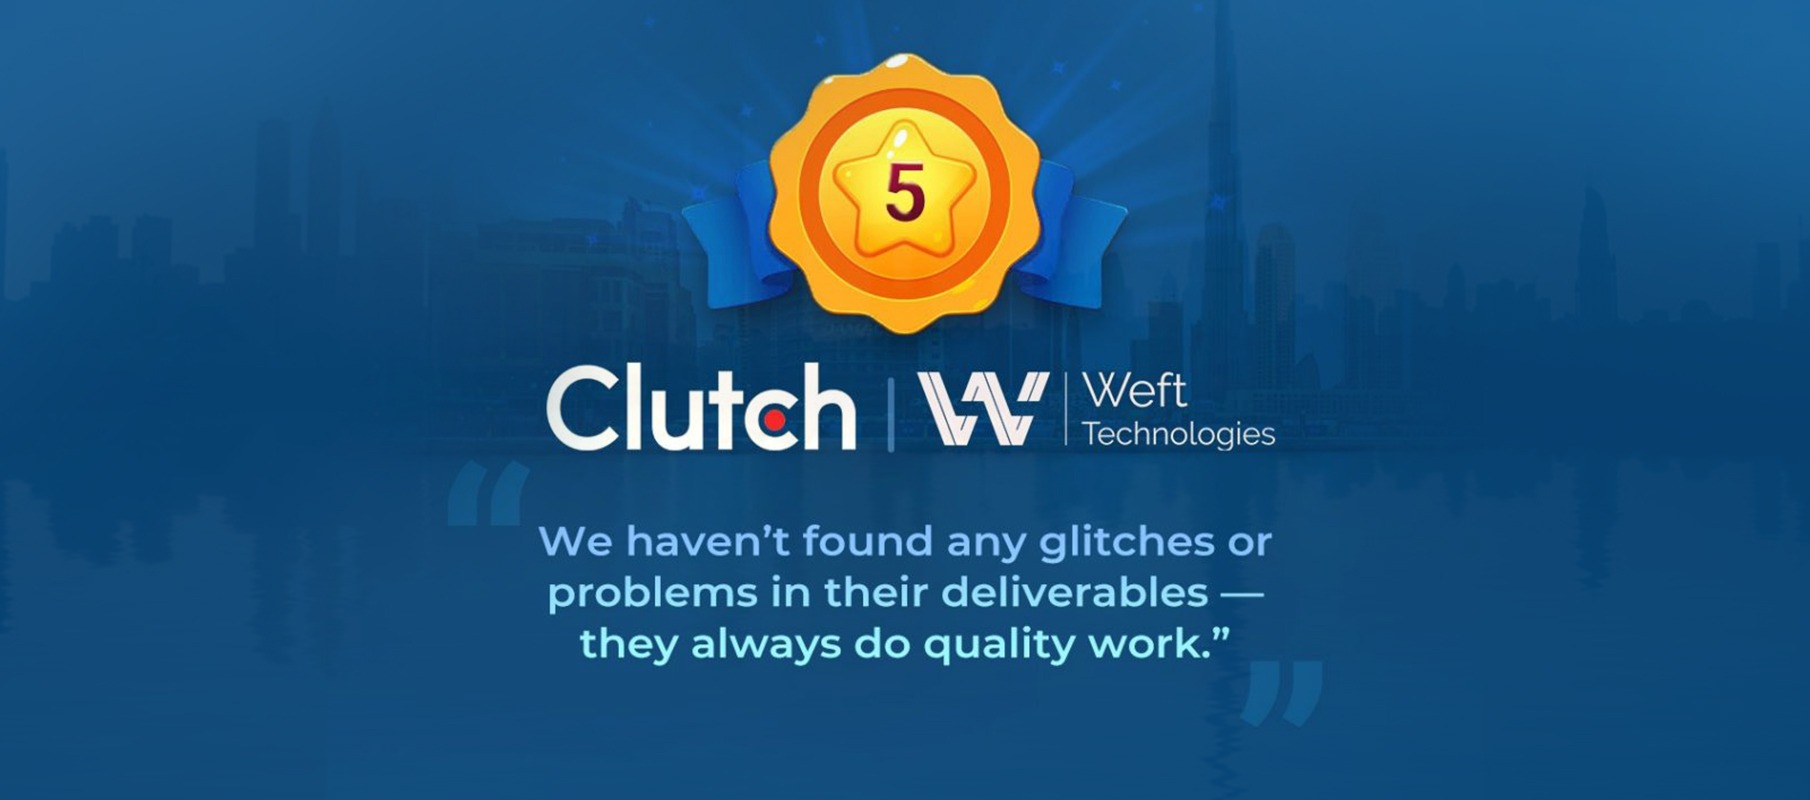 Weft Technologies Receives Another Review on Clutch